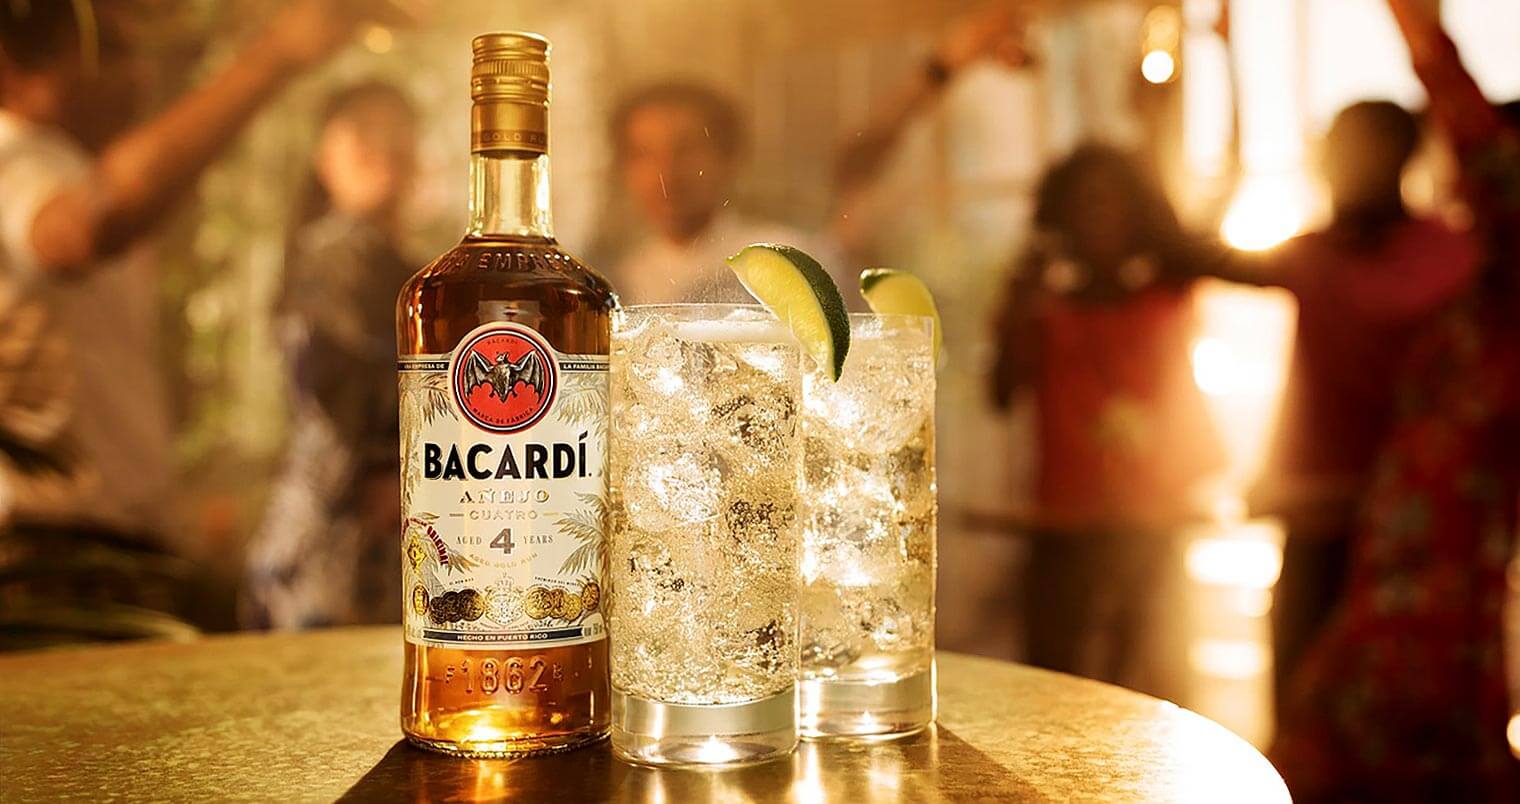 BACARDÍ Cuatro mismo, bottle and cocktails, people dancing in back, featured image